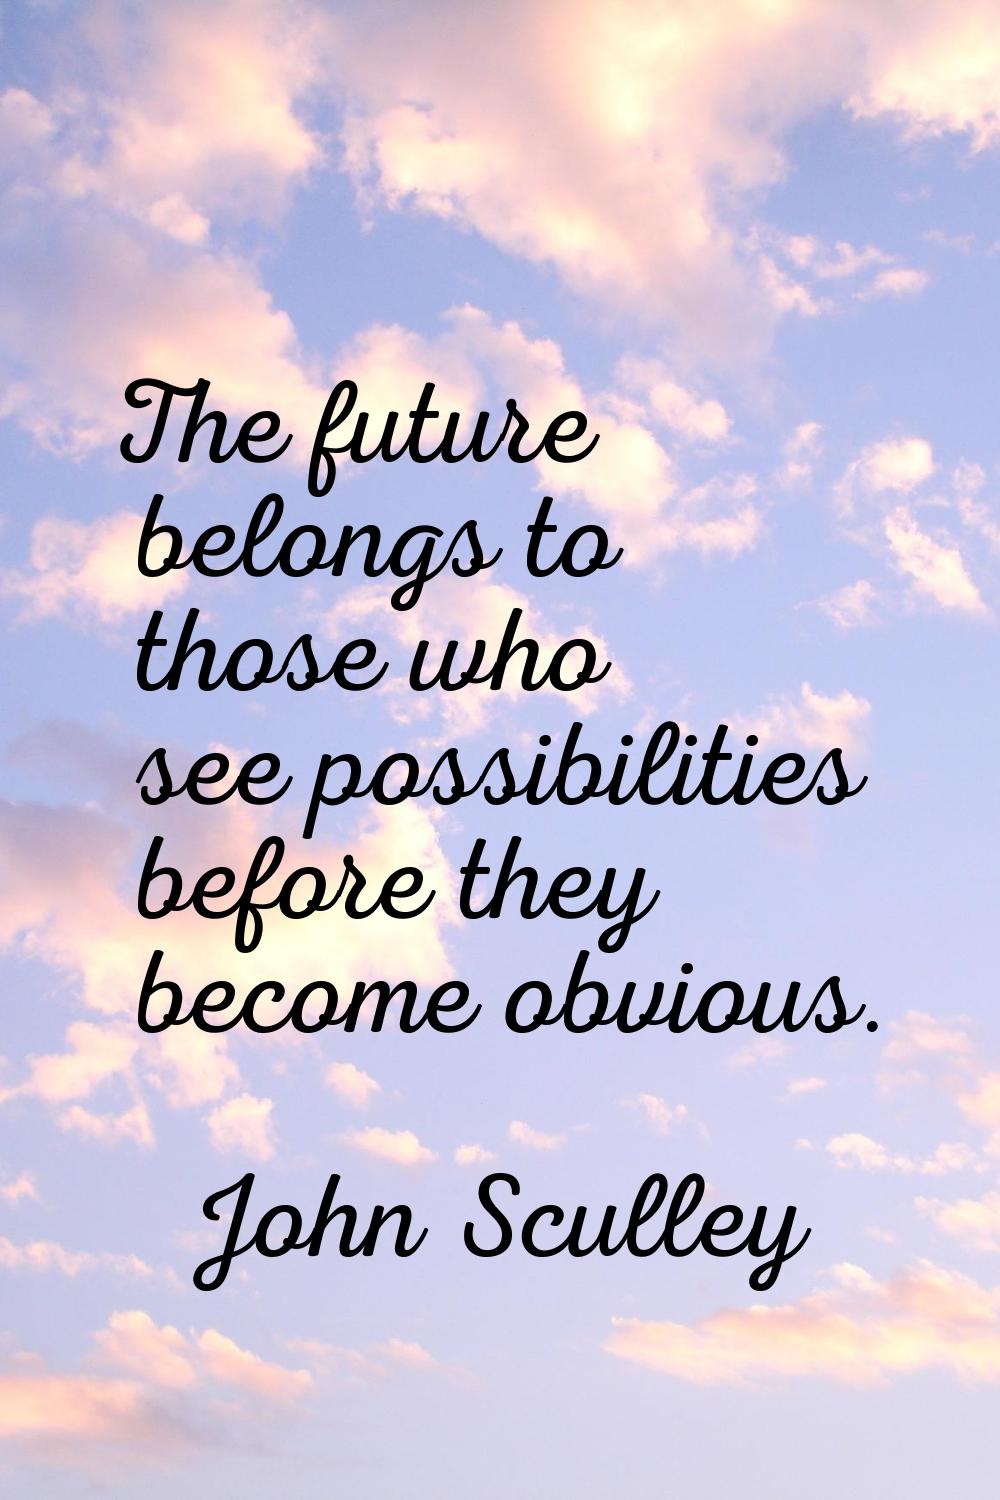 The future belongs to those who see possibilities before they become obvious.